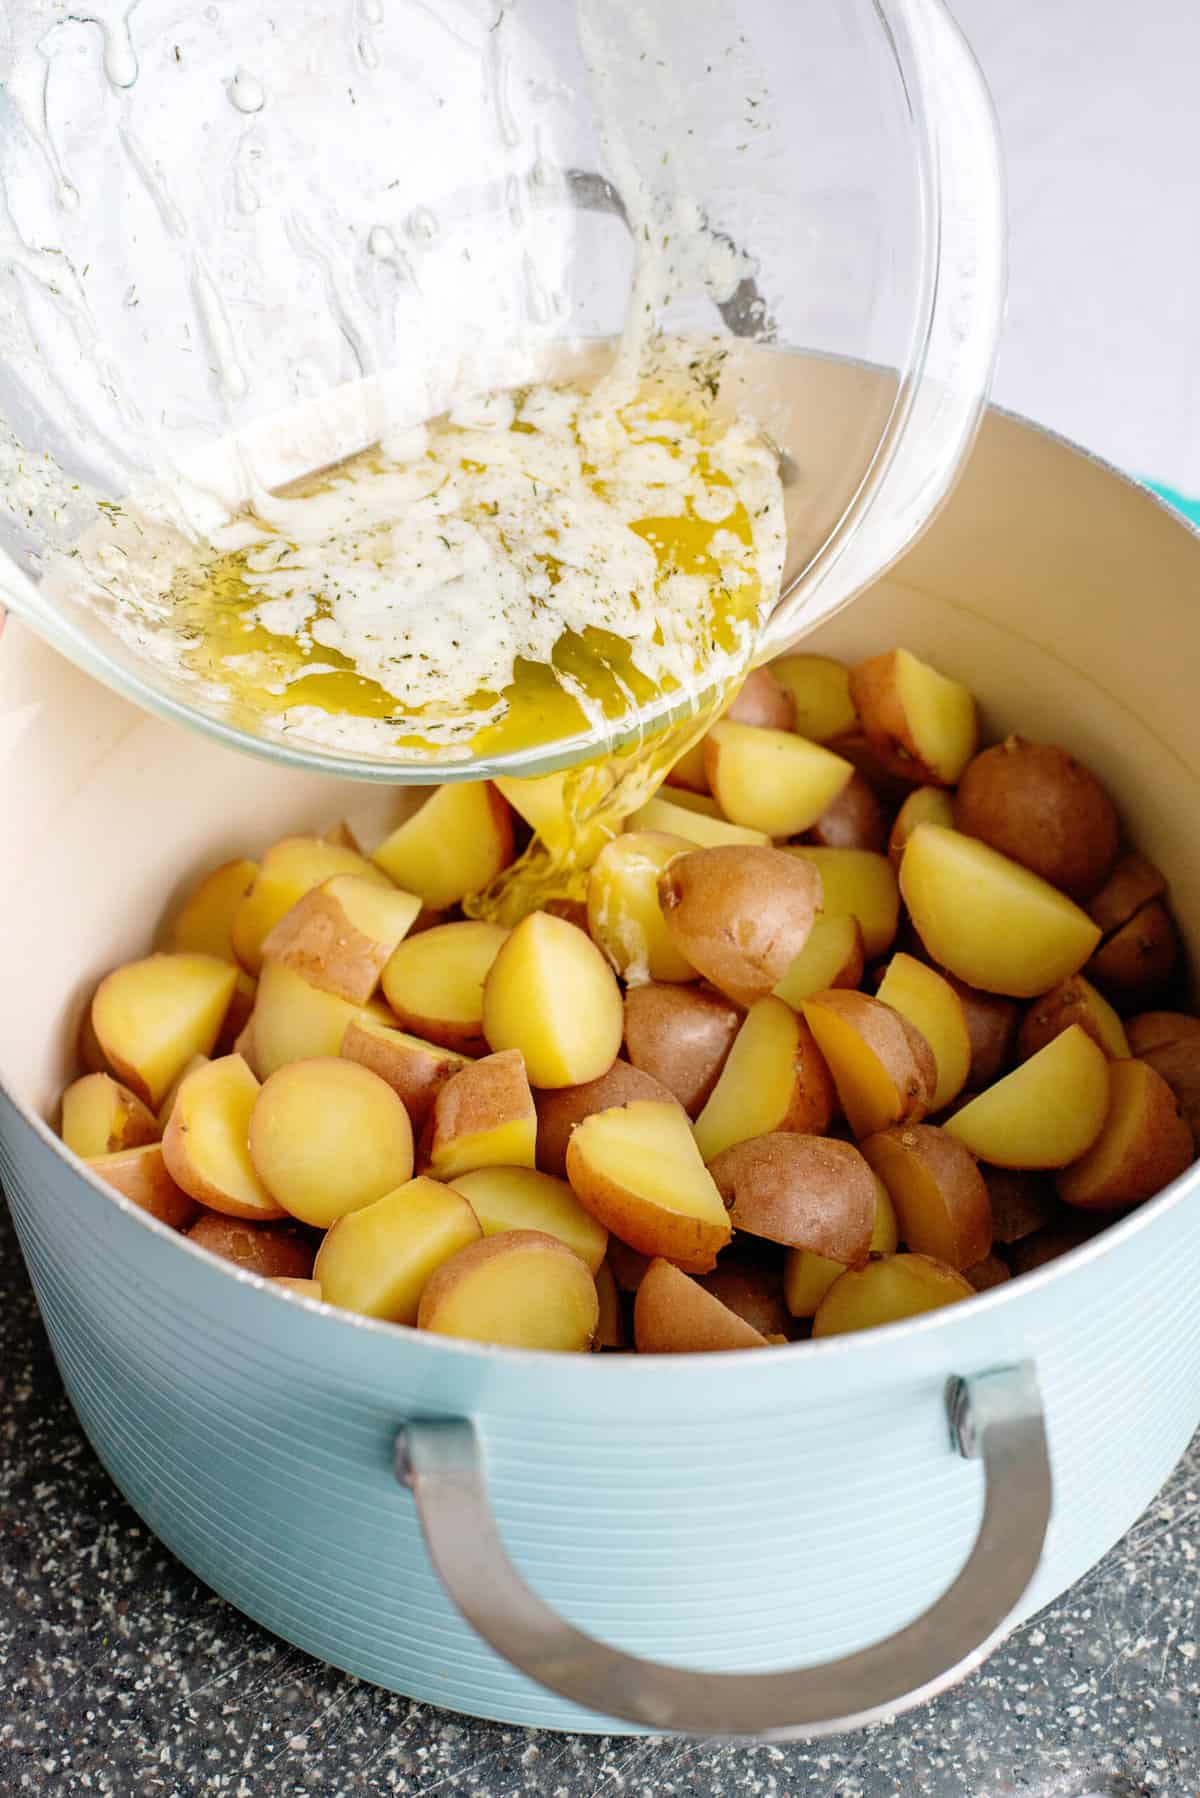 pour butter over potatoes